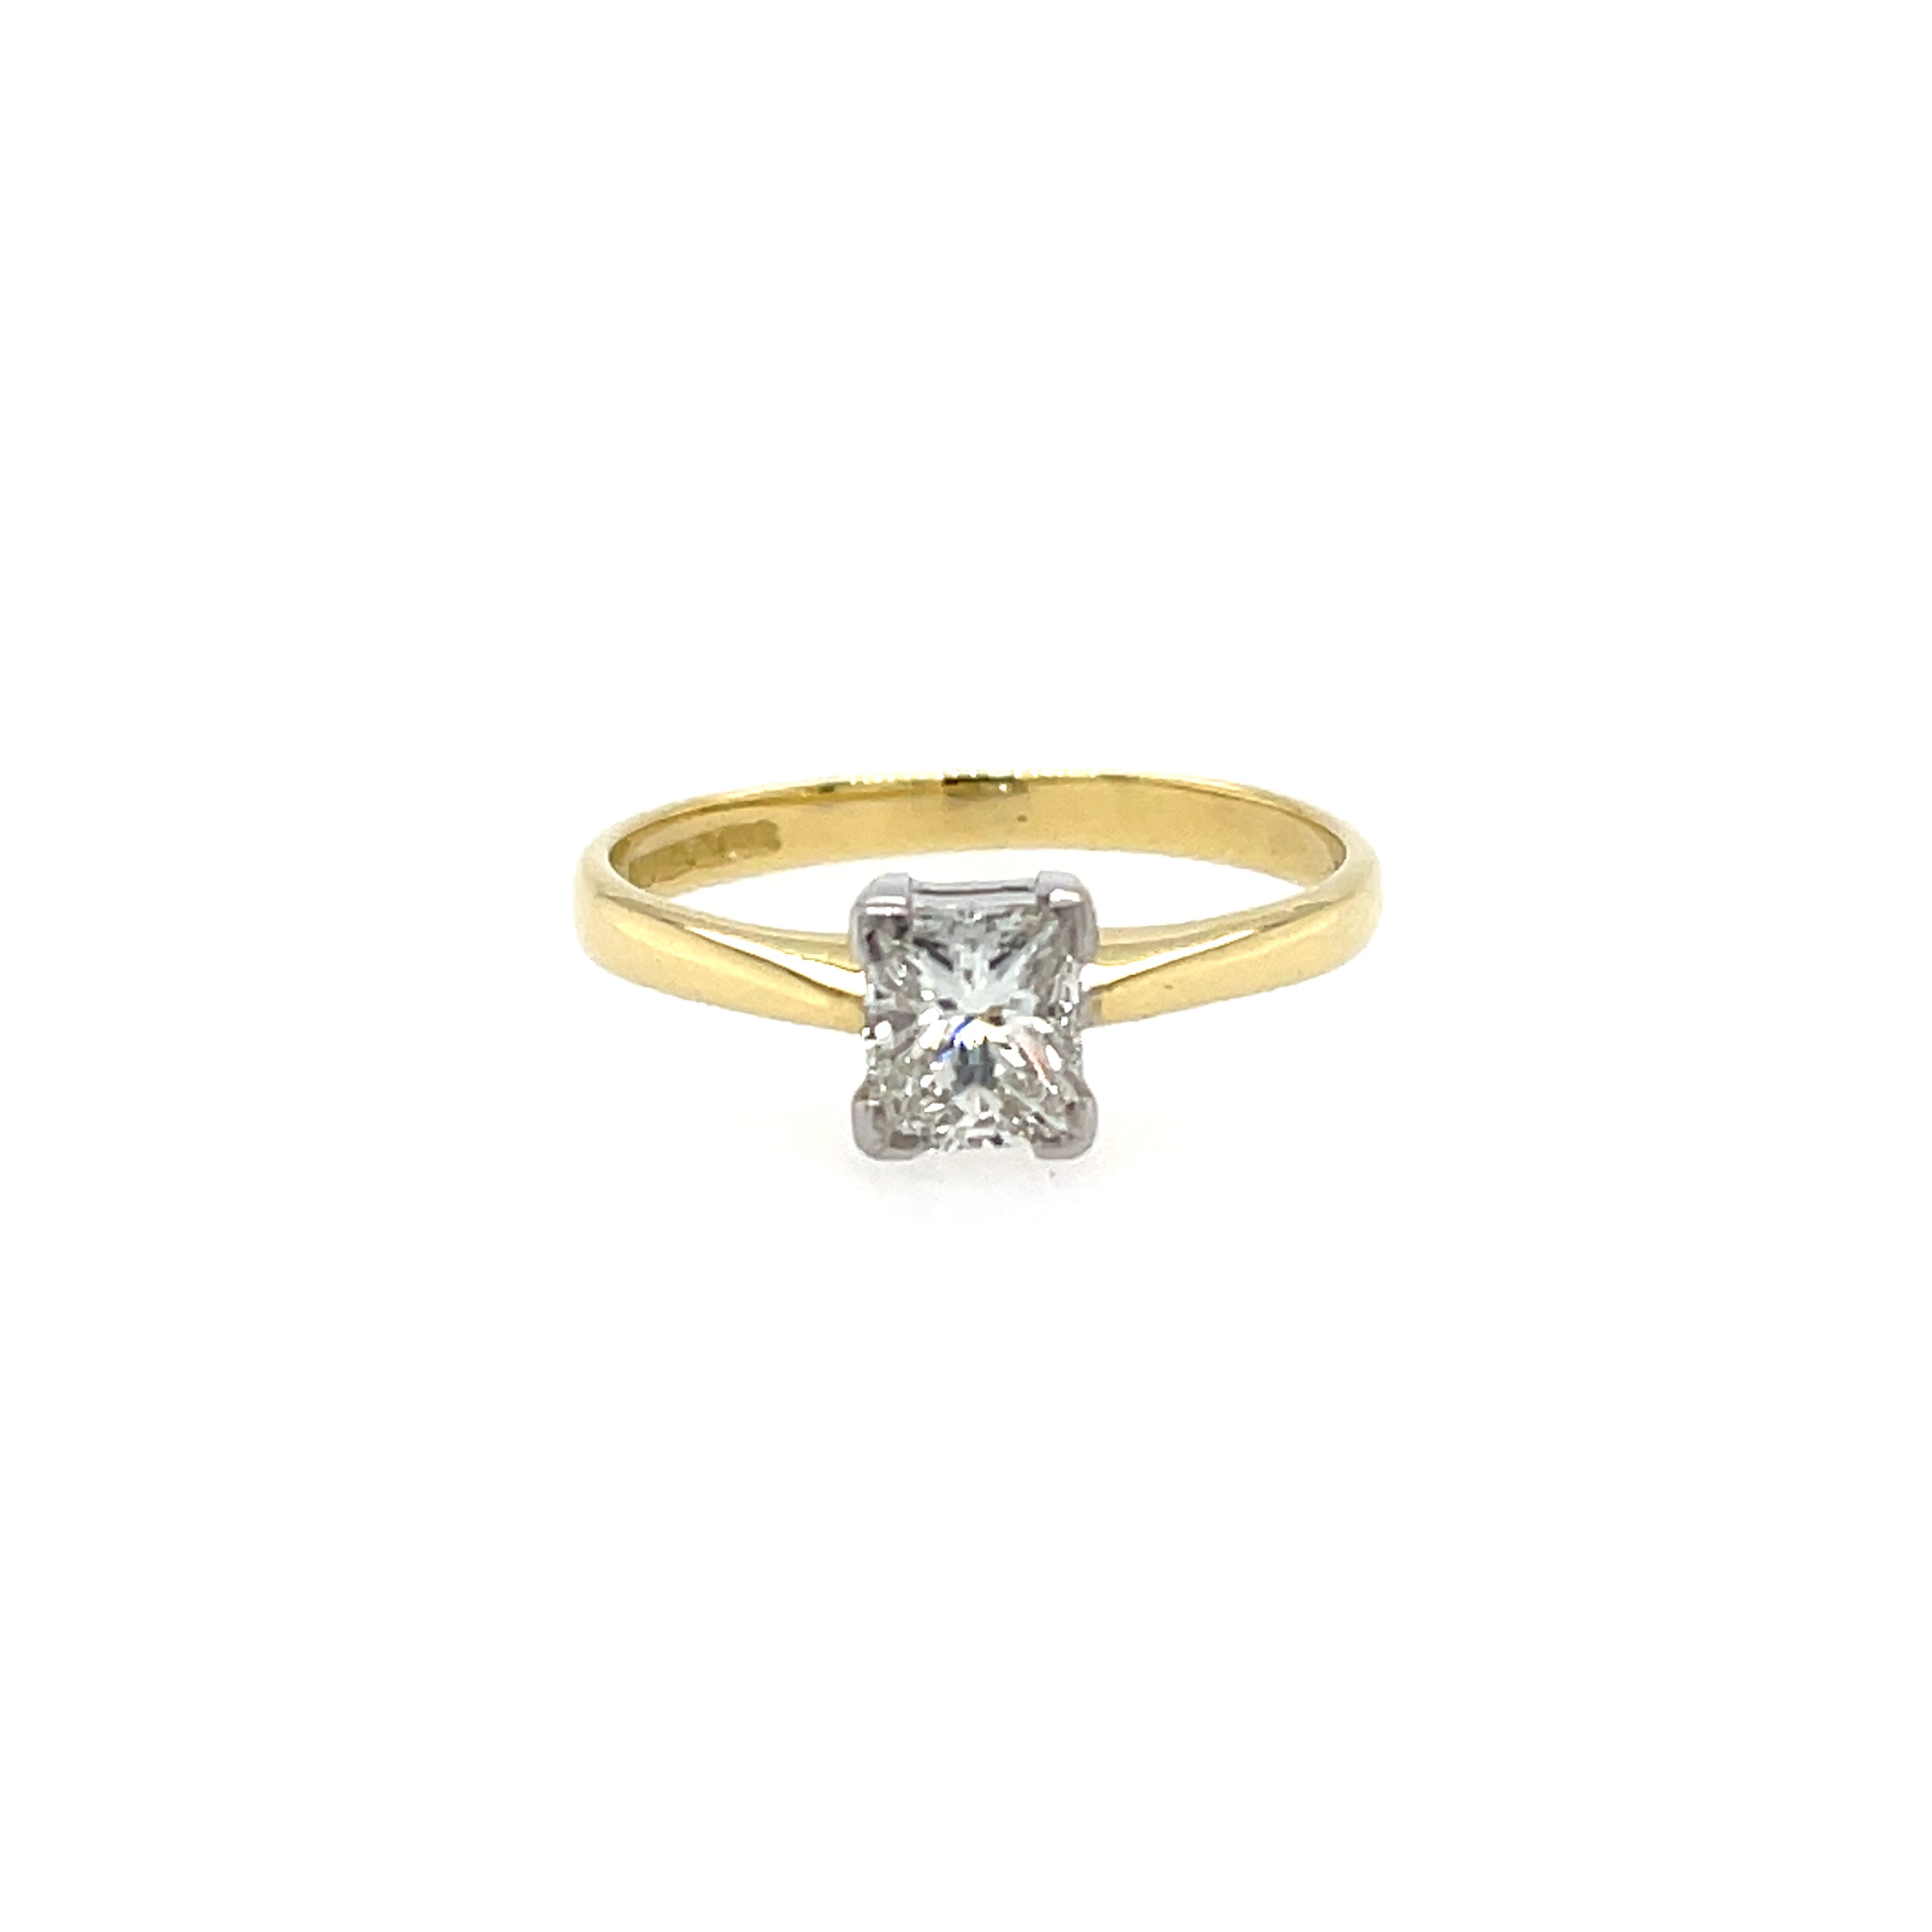 18ct Yellow Gold 0.61ct Princess Cut Diamond Solitaire Engagement Ring Certified G VVS